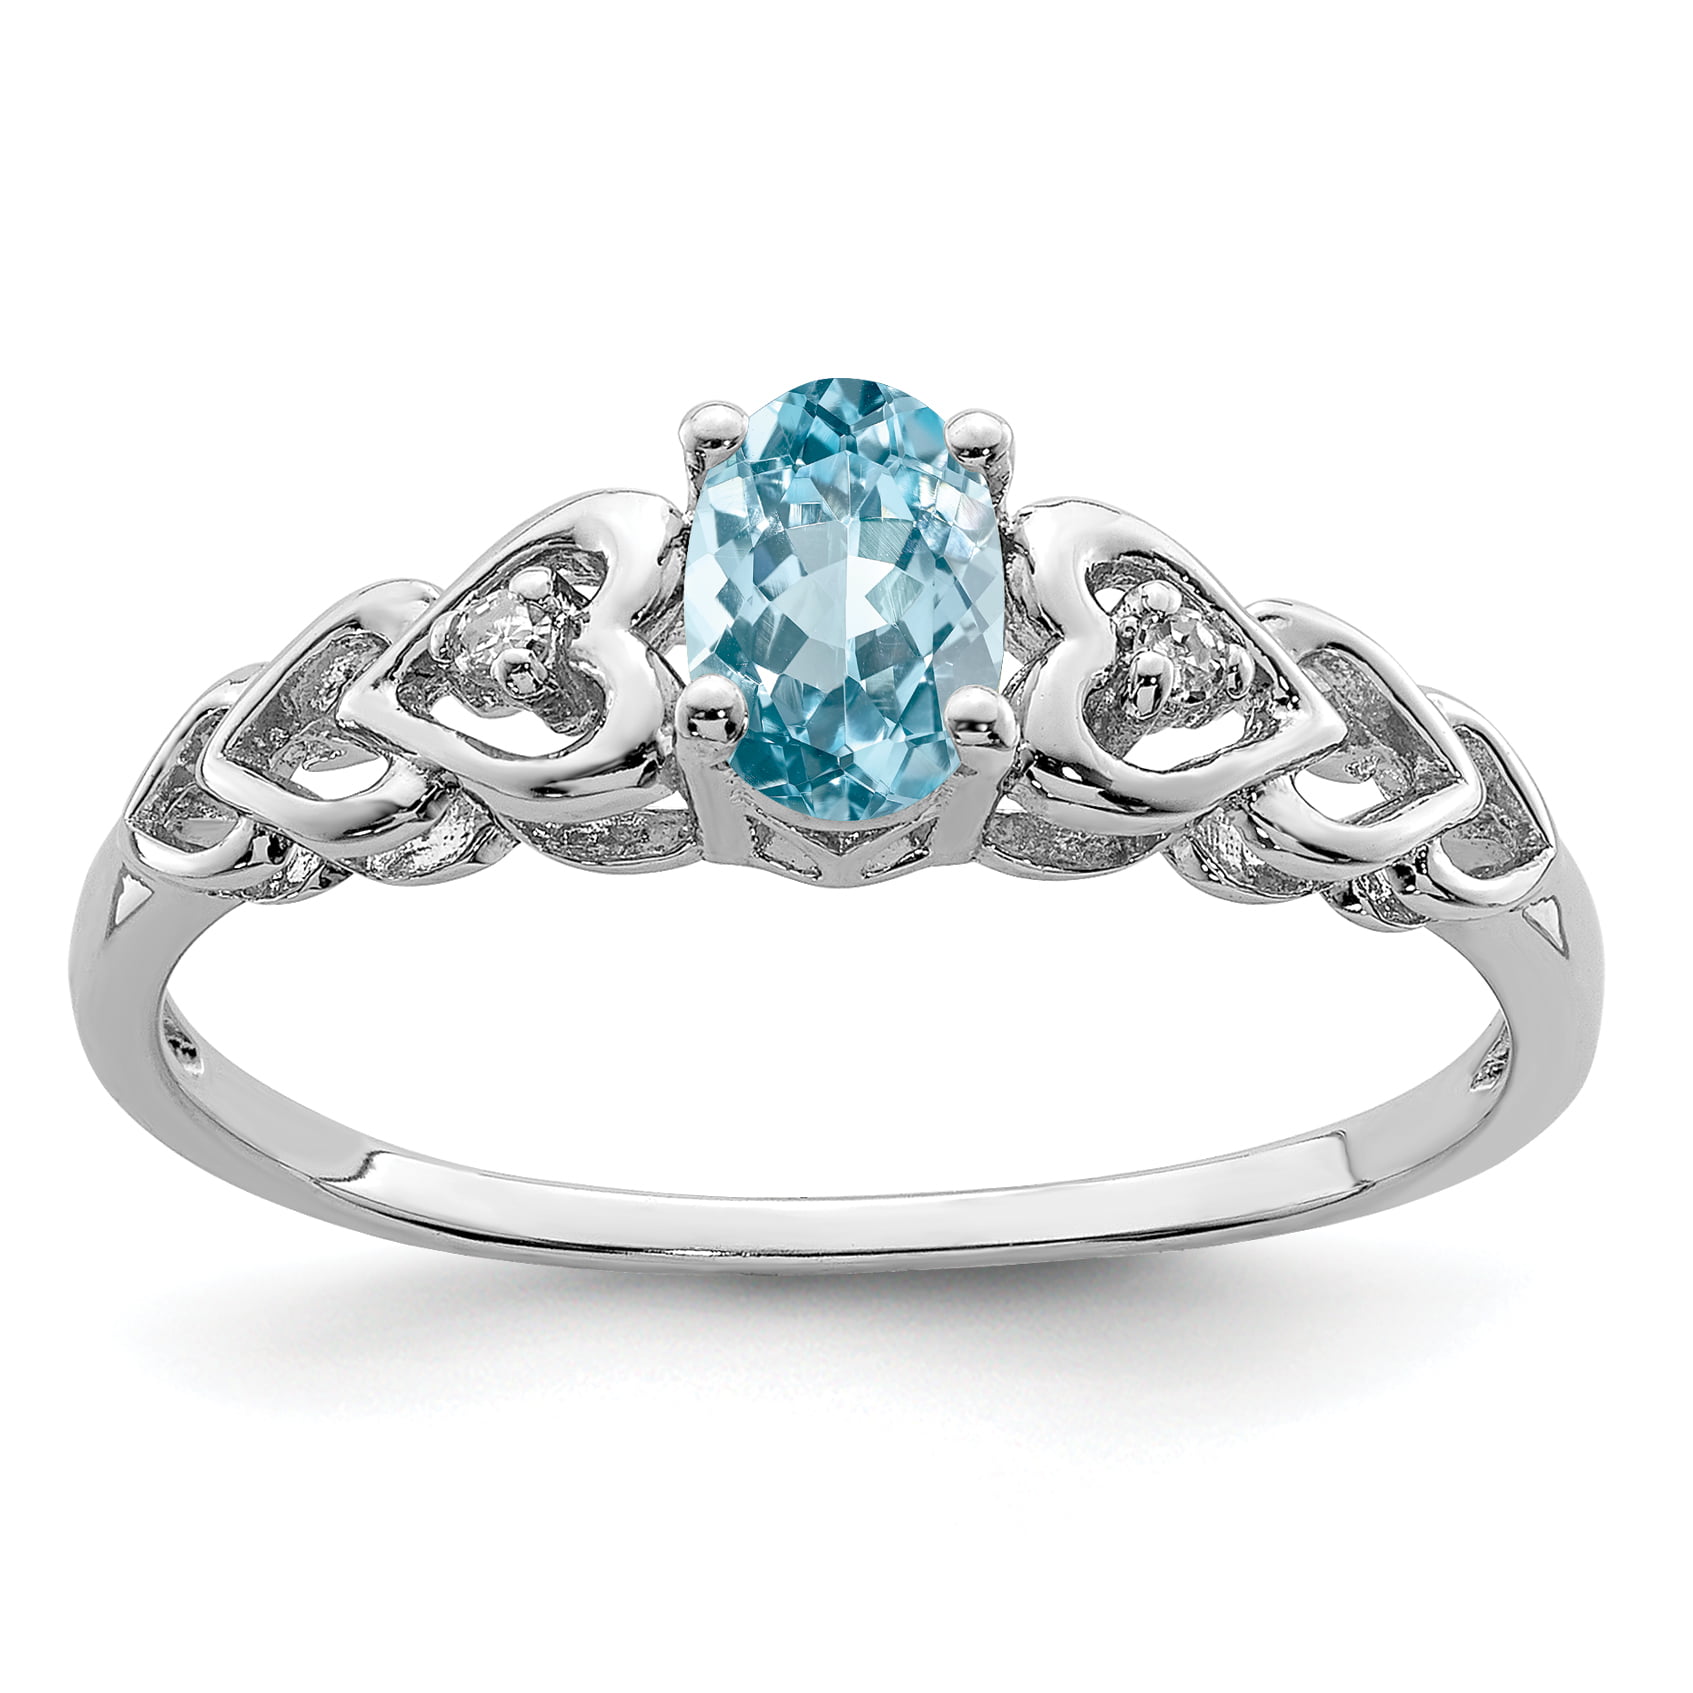 Sizes 7  & 9 2.50 ctw Swiss Blue Topaz Ring in Platinum Over Sterling Silver